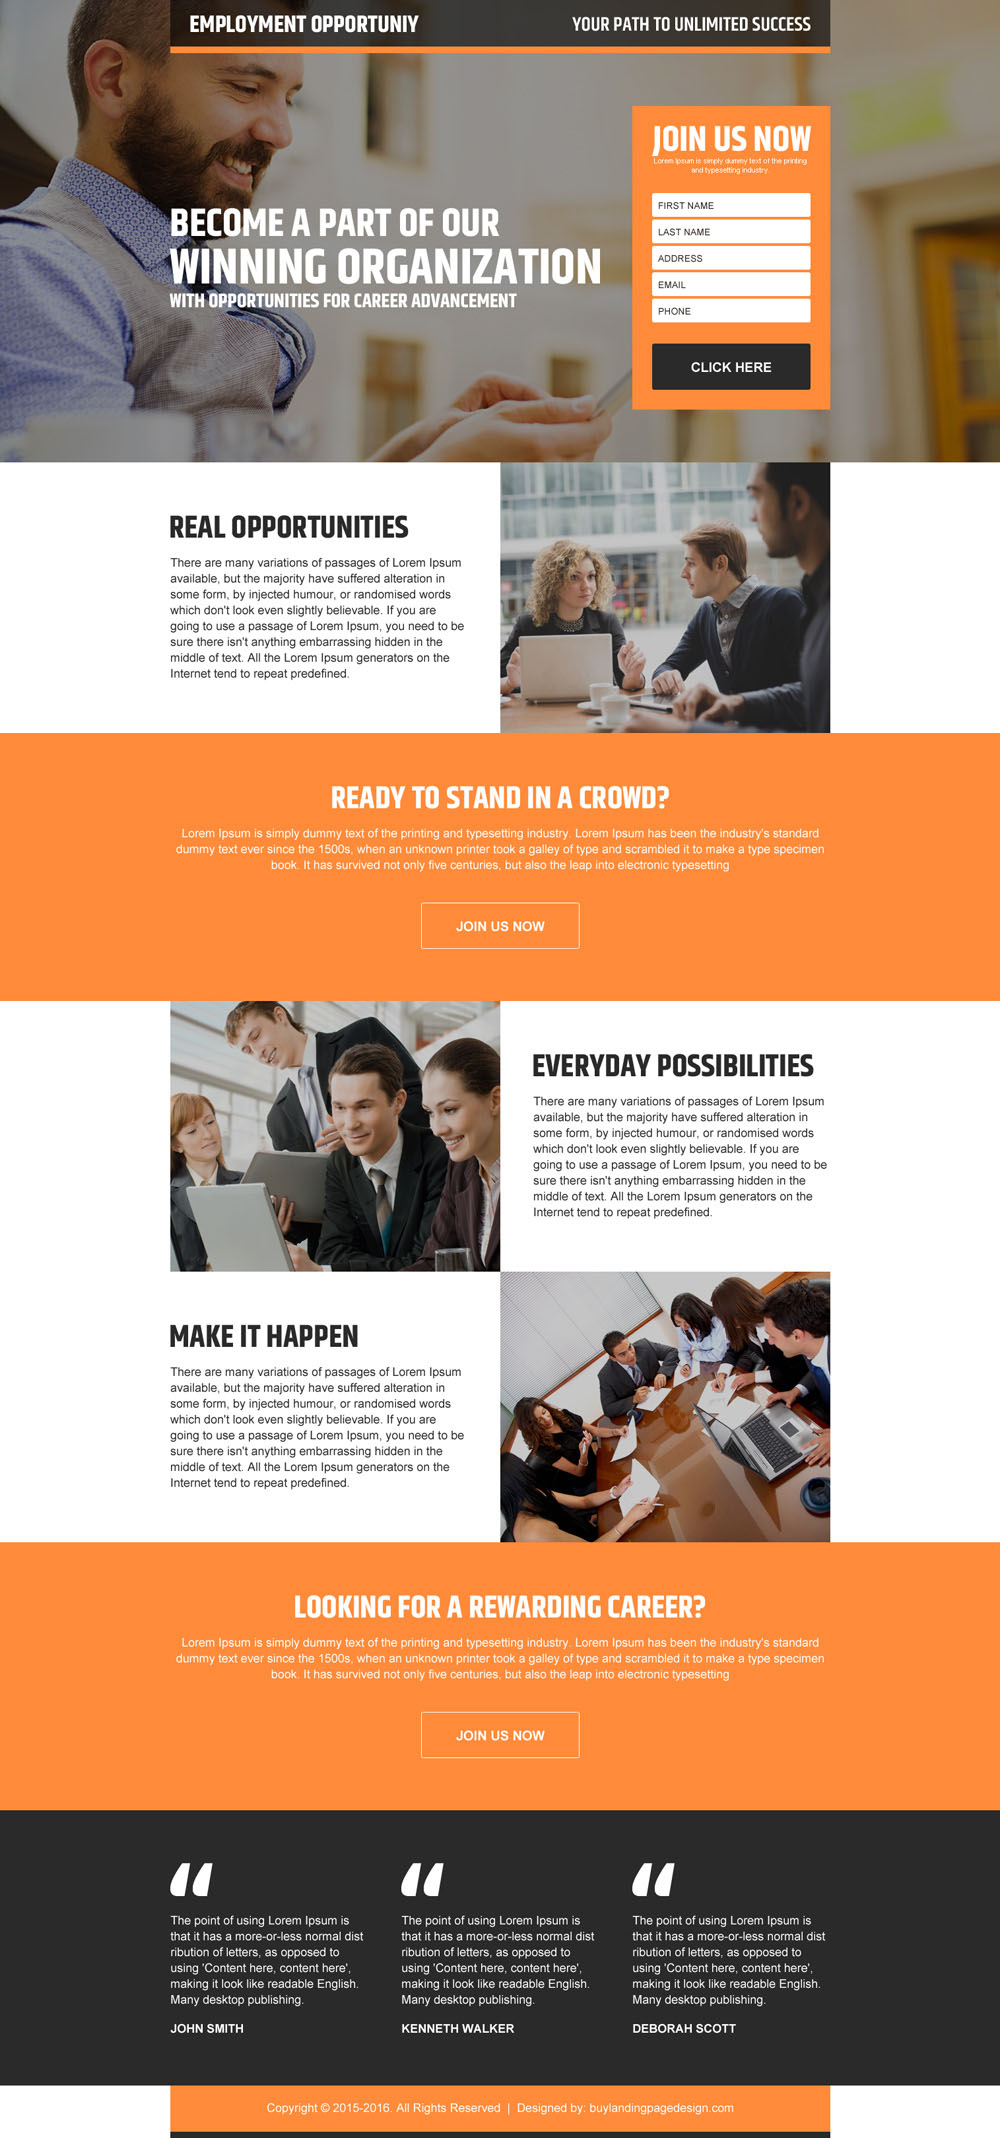 real-employment-opportunity-join-now-free-lead-gen-landing-page-005